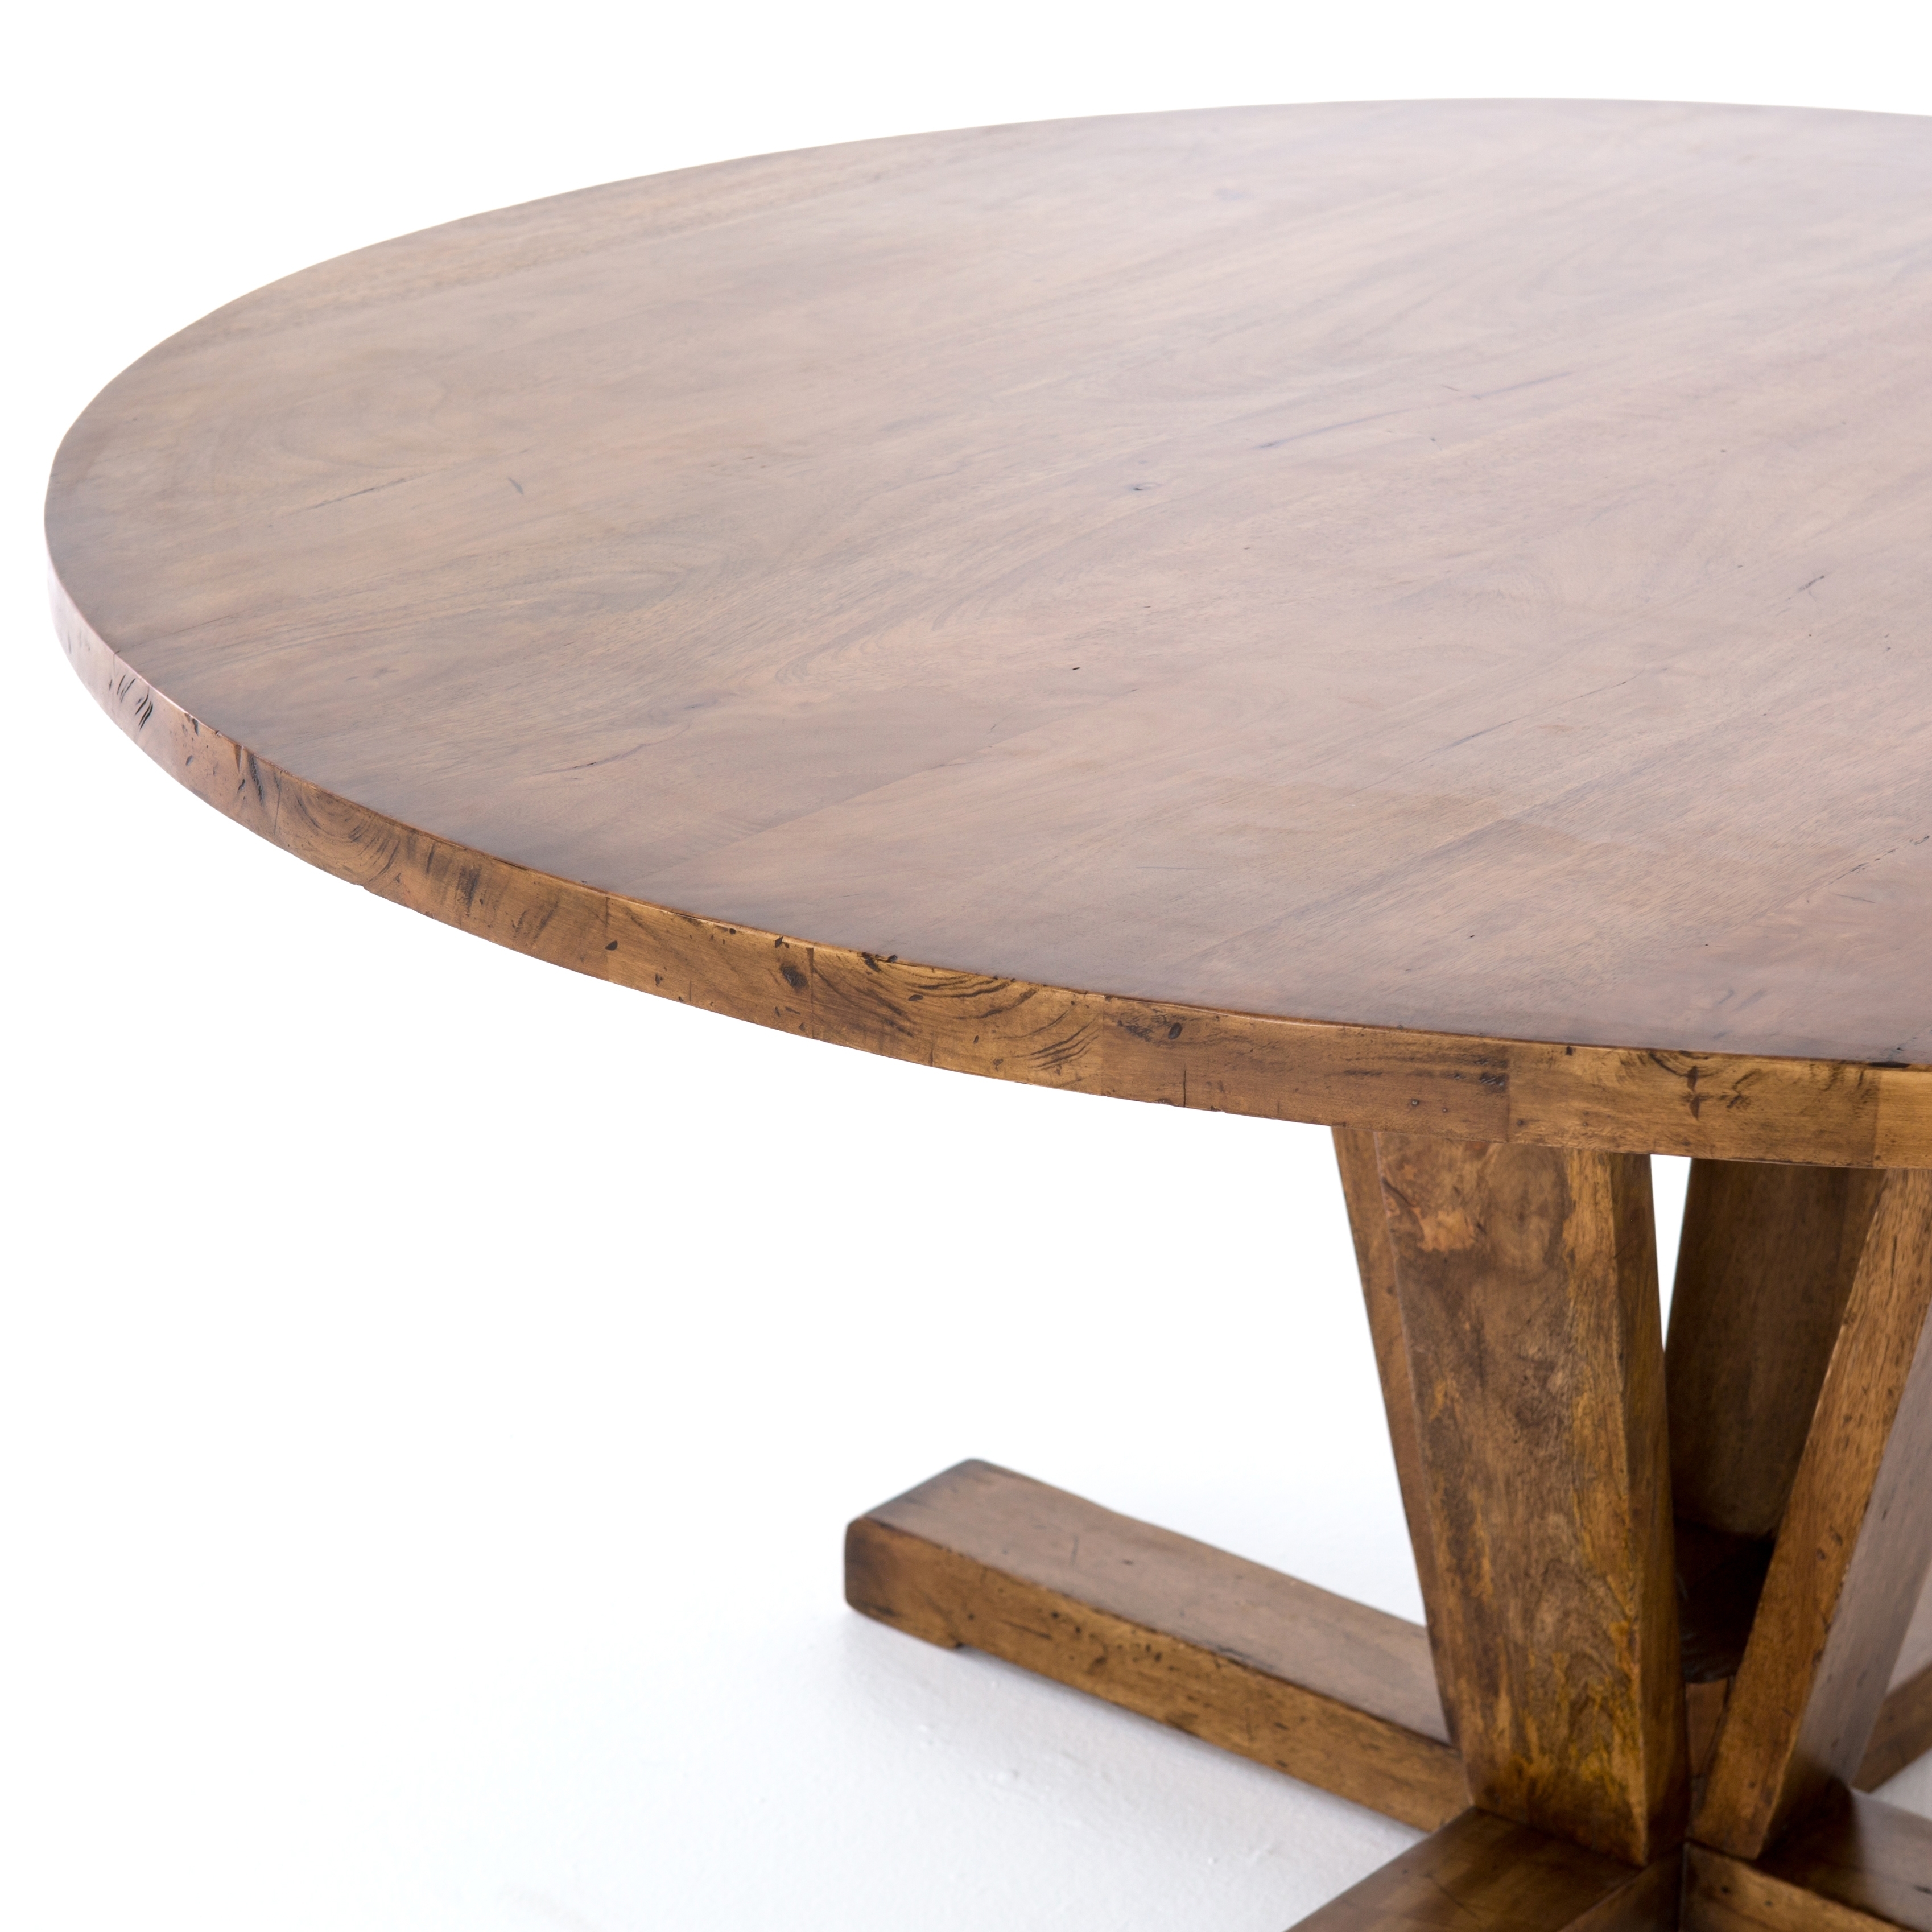 Maleva Round Dining Table, Reclaimed Wood - Image 6